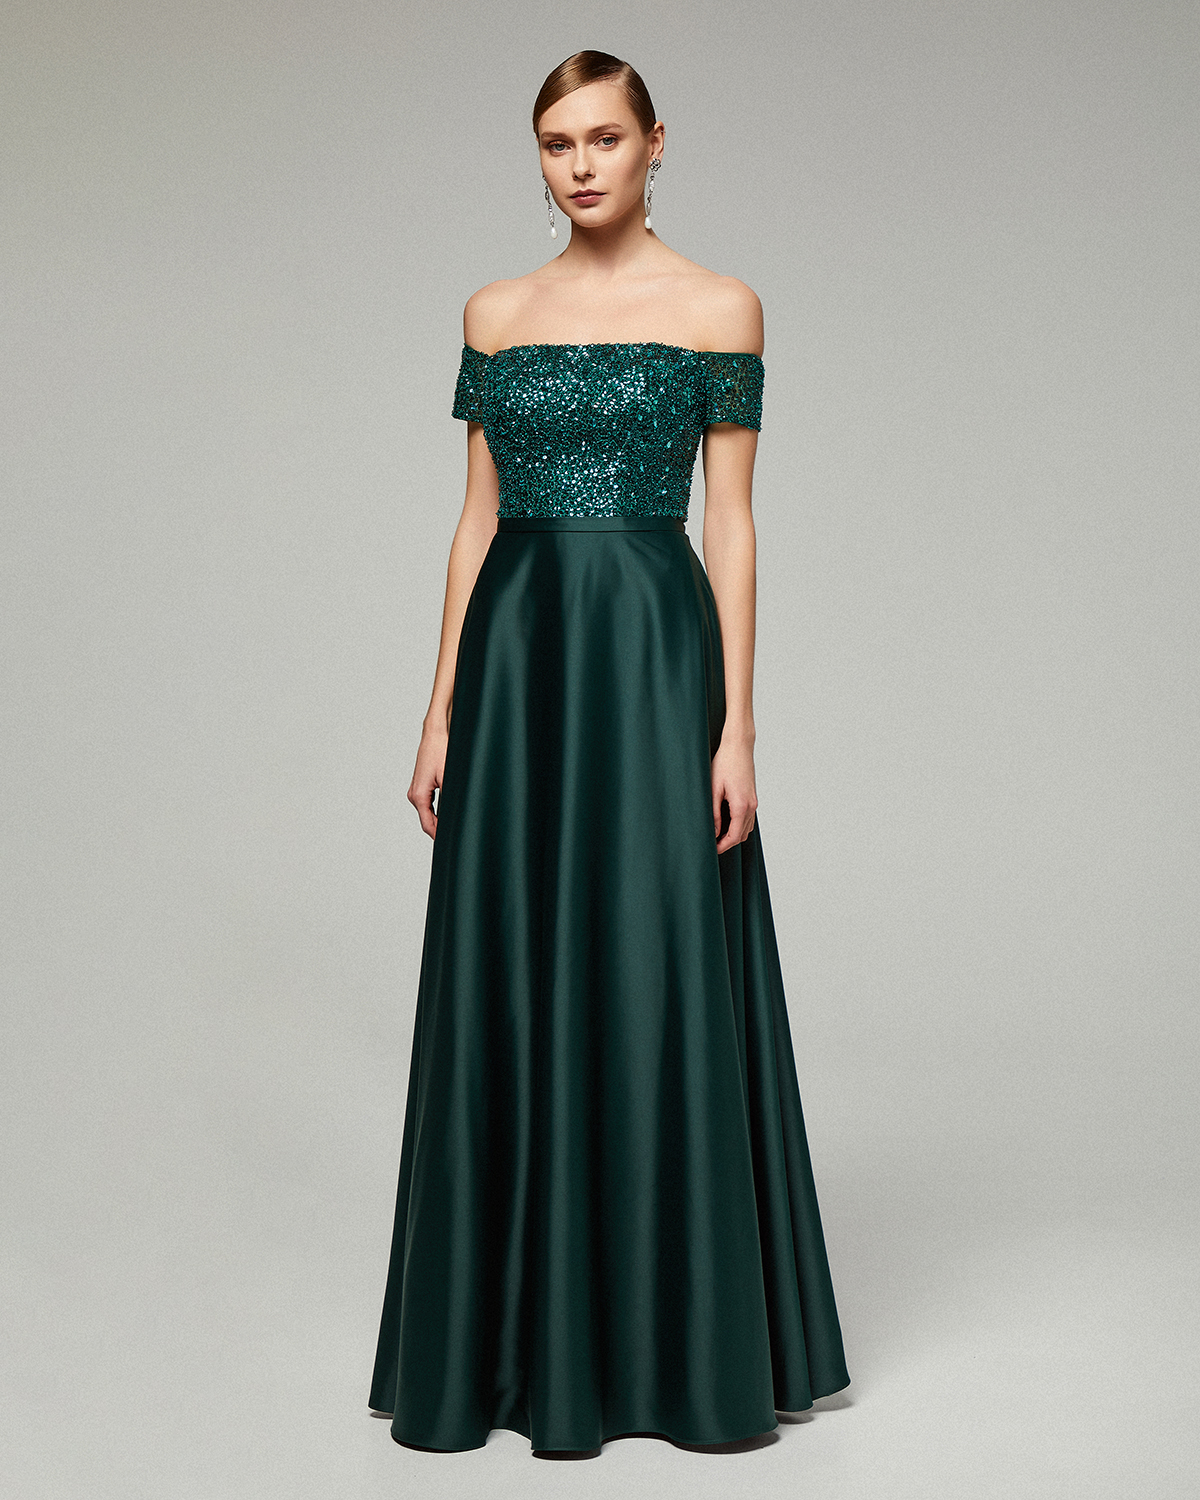 Long evening satin dress with beaded top and short sleeves